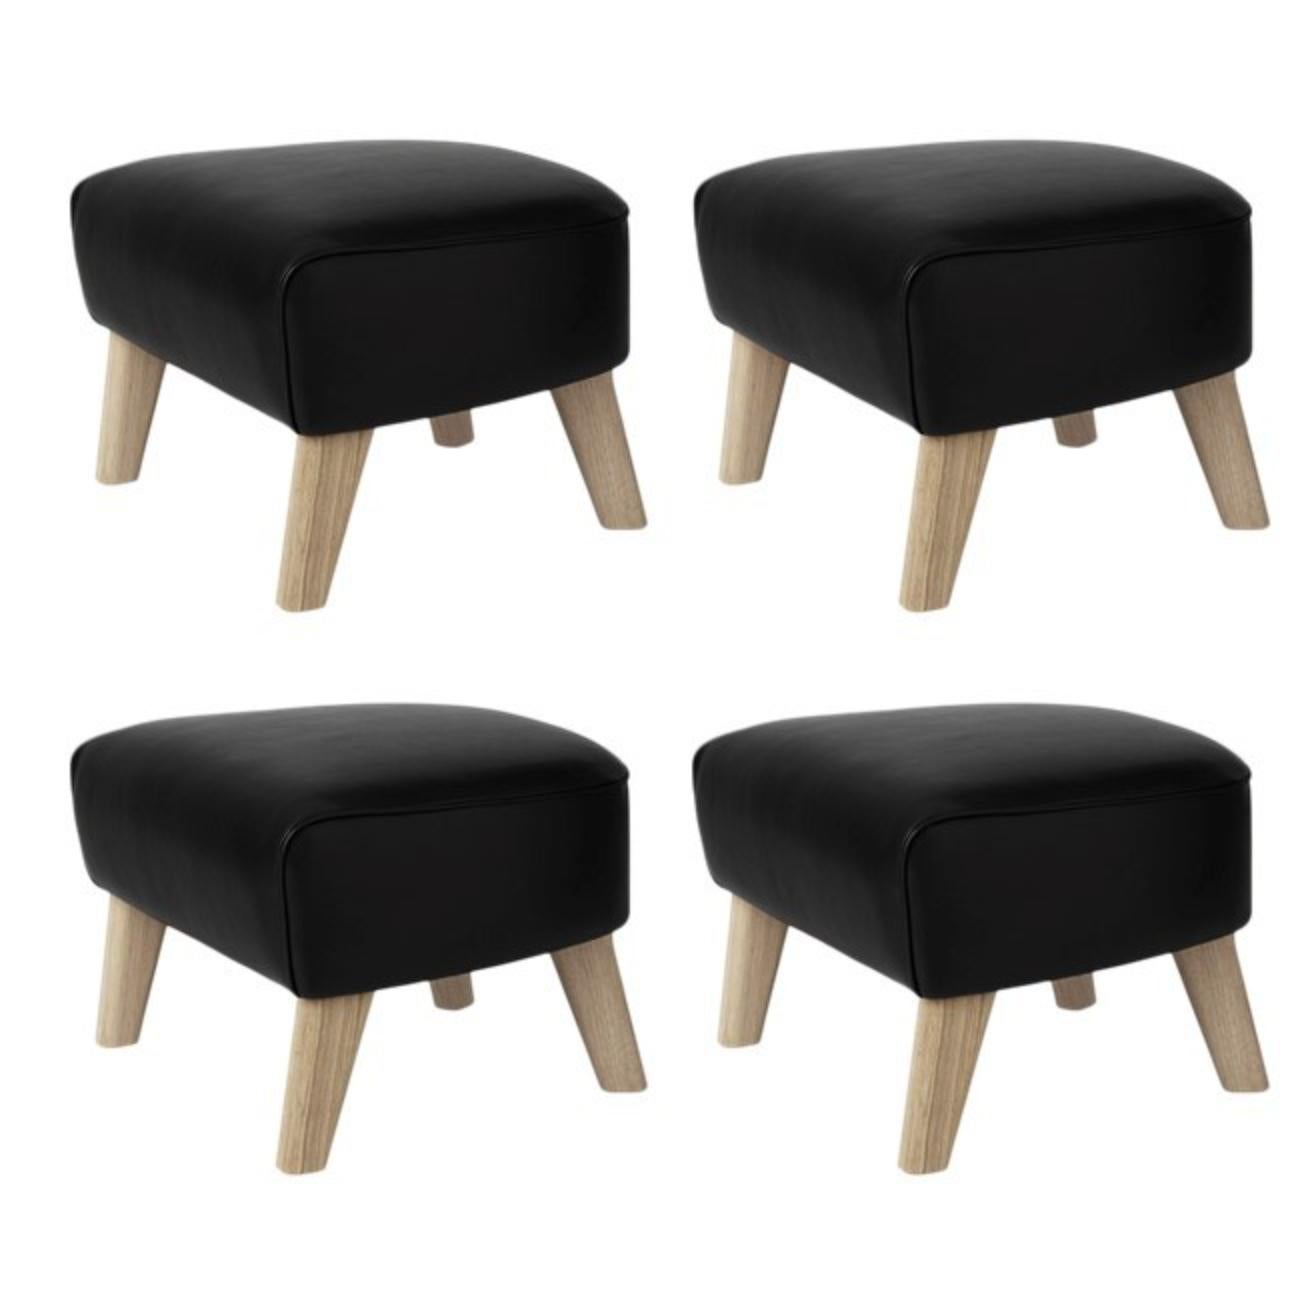 Set of 4 black leather and natural oak my own chair footstools by Lassen
Dimensions: W 56 x D 58 x H 40 cm 
Materials: Leather, oak

The my own chair Footstool has been designed in the same spirit as Flemming Lassen’s original iconic chair,